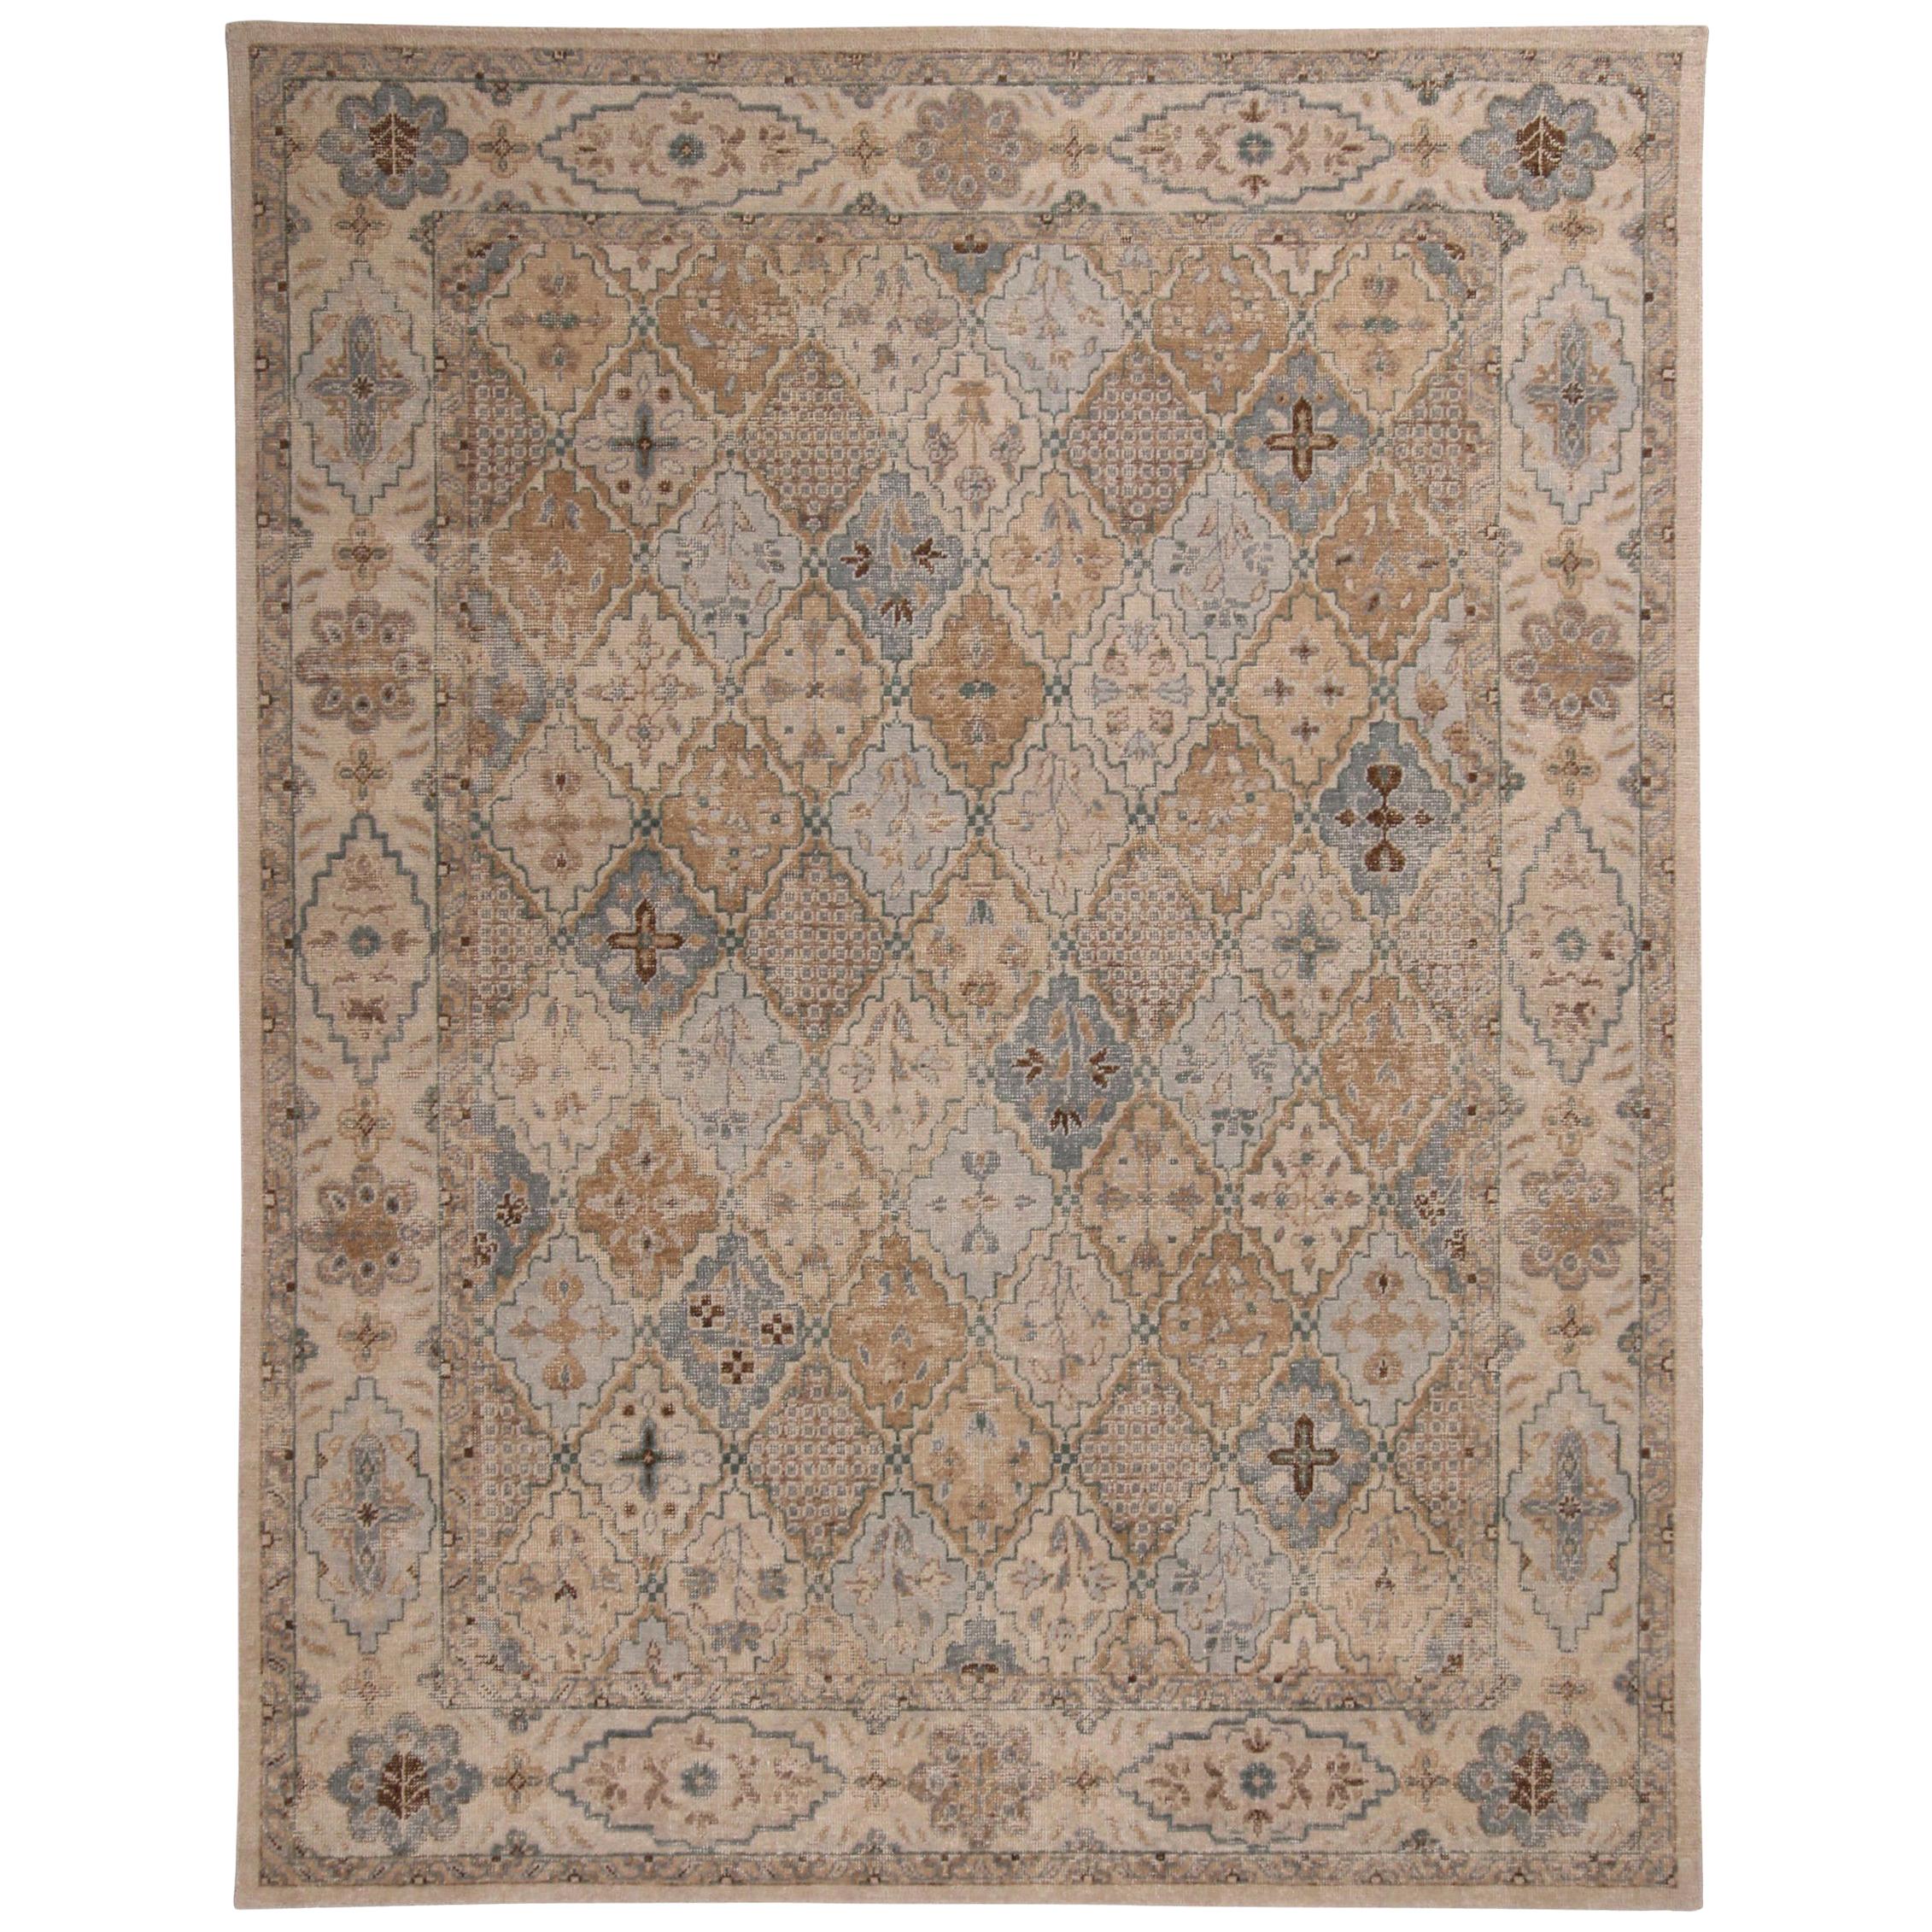 Rug & Kilim's Homage Tabriz Wool Rug in White Blue and Gold Geometric Pattern For Sale